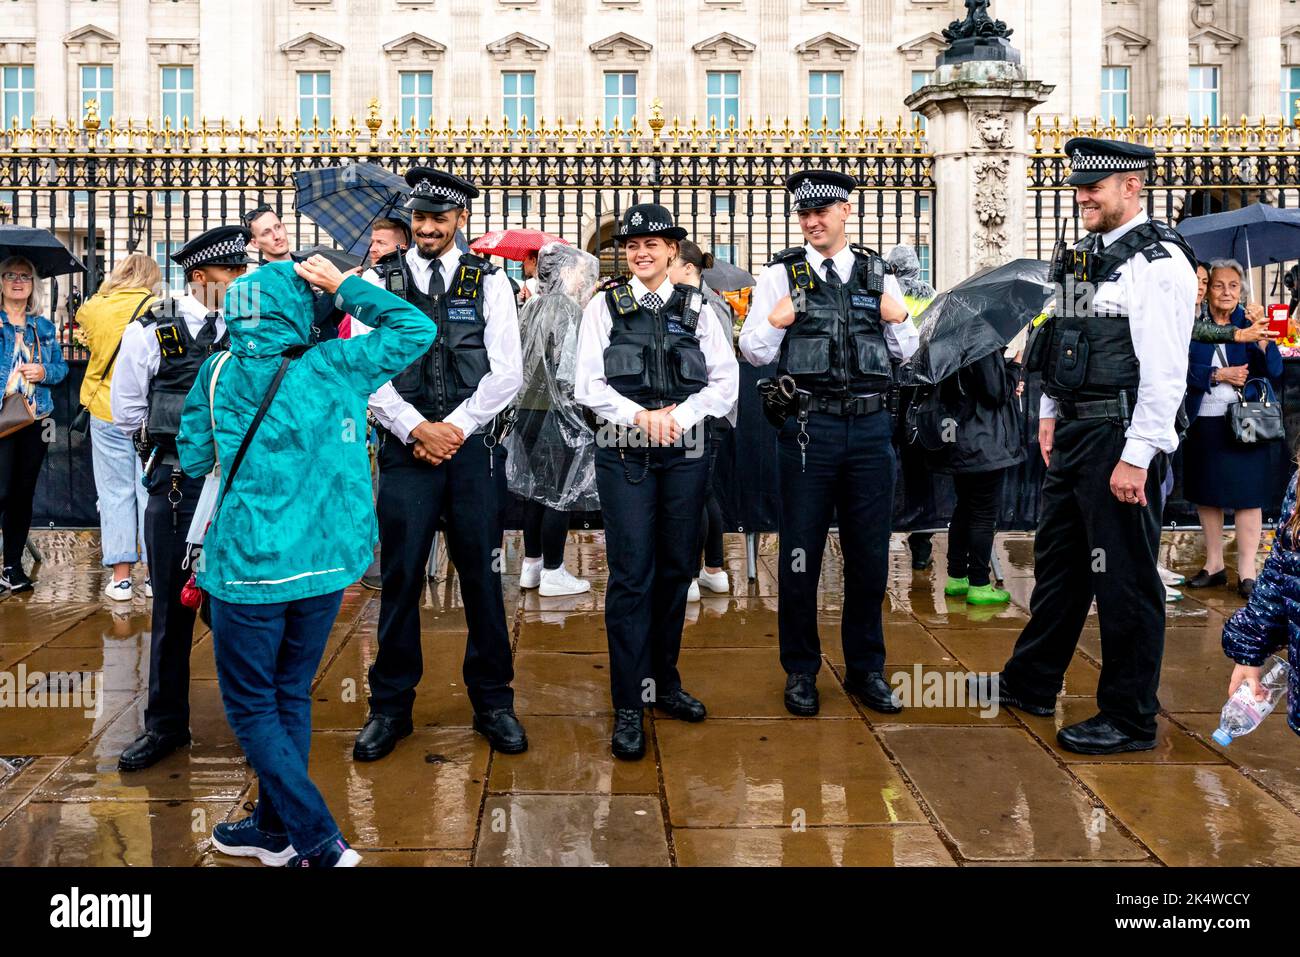 Metropolitan Police Officers Stand Outside Buckingham Palace In The Rain, London, UK. Stock Photo